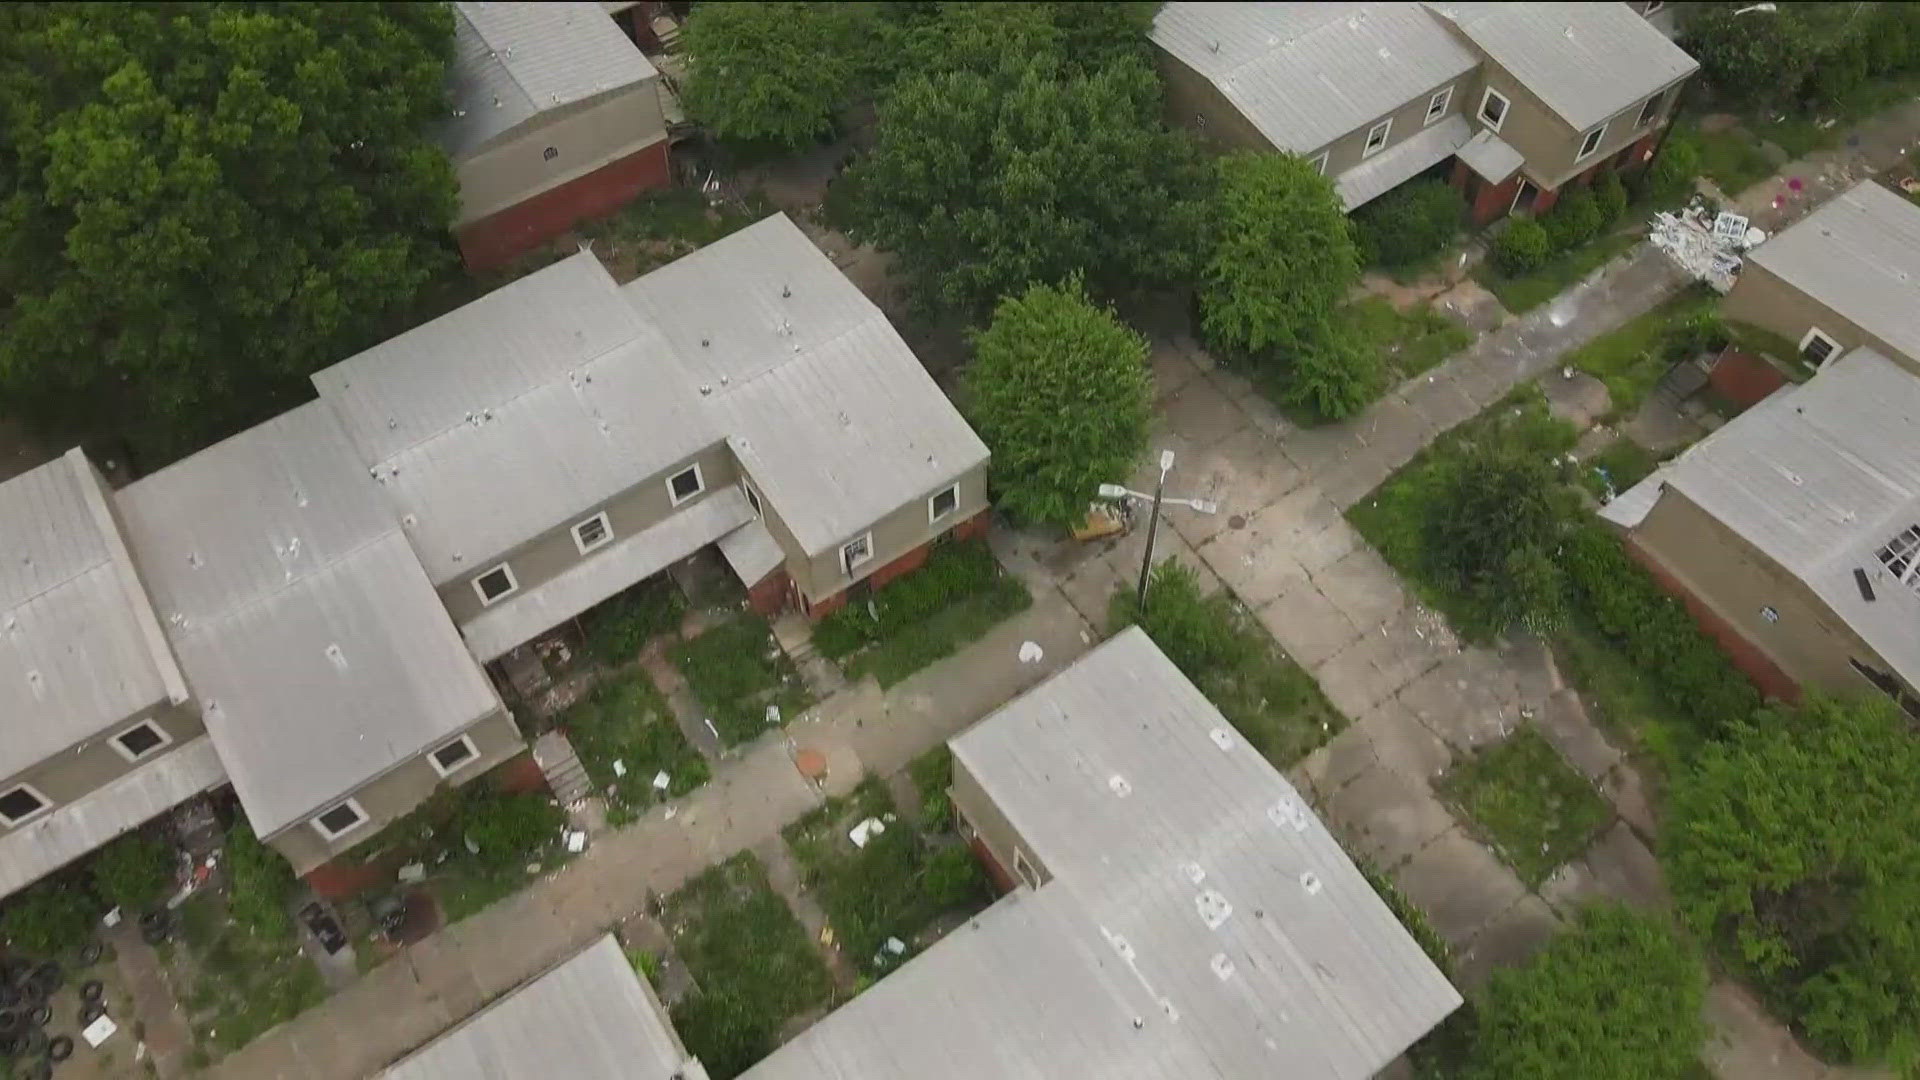 11Alive spoke with the mayor on Wednesday, who said the city helped residents get HUD vouchers for housing.